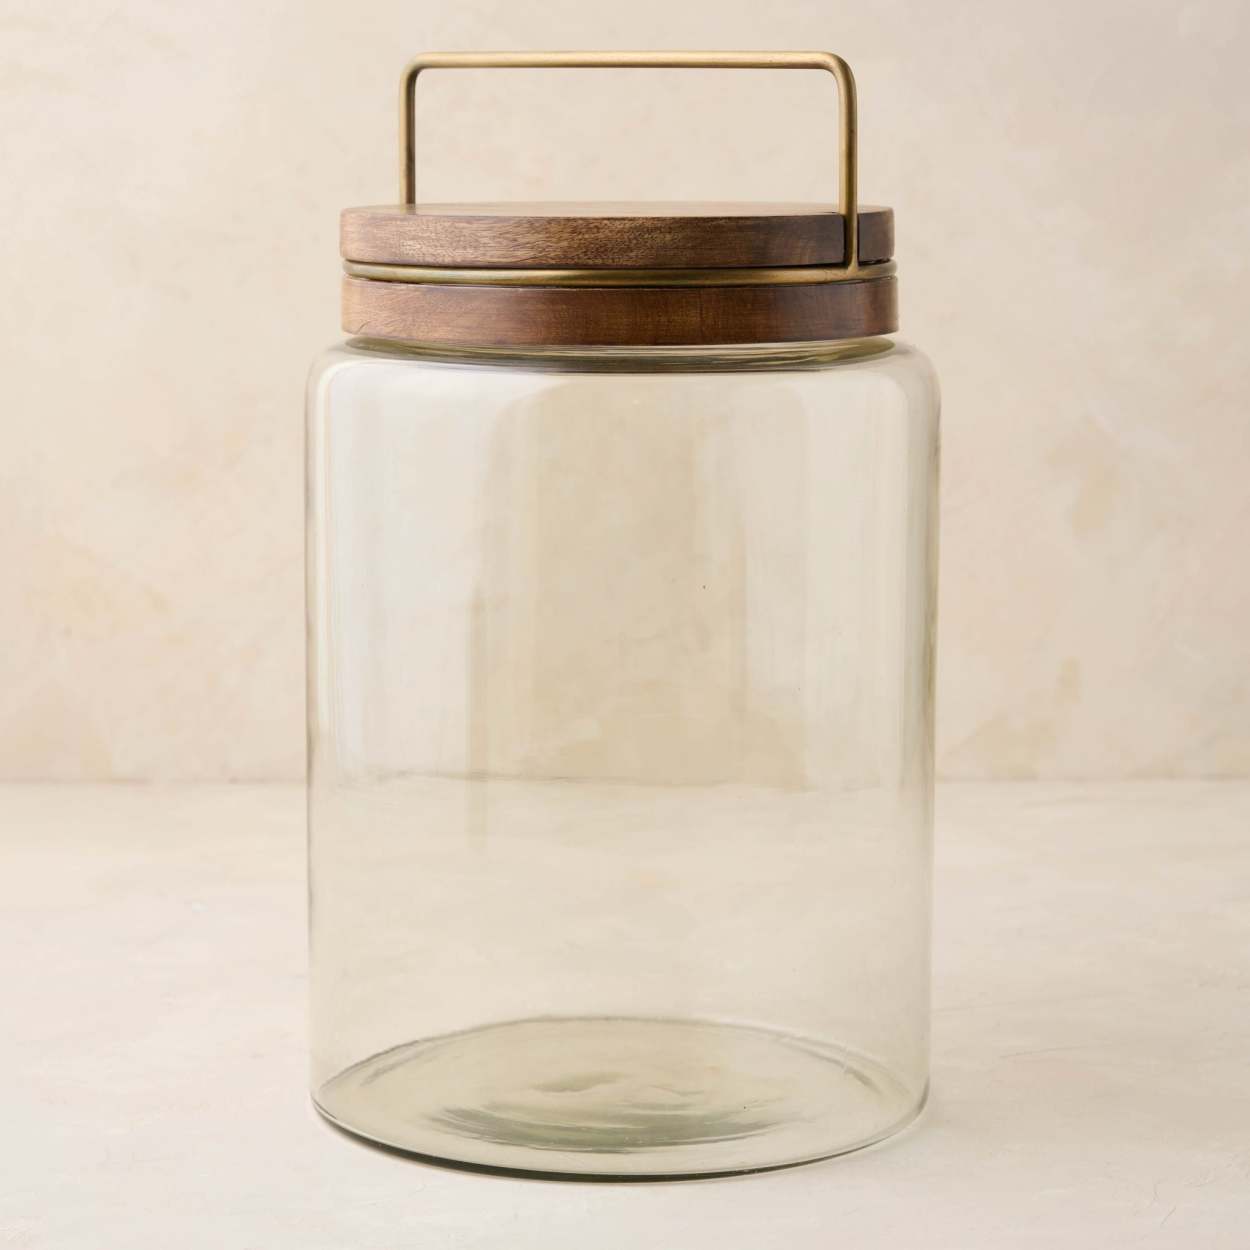 SALE Ceramic Jam Jar with wooden top and spoon.